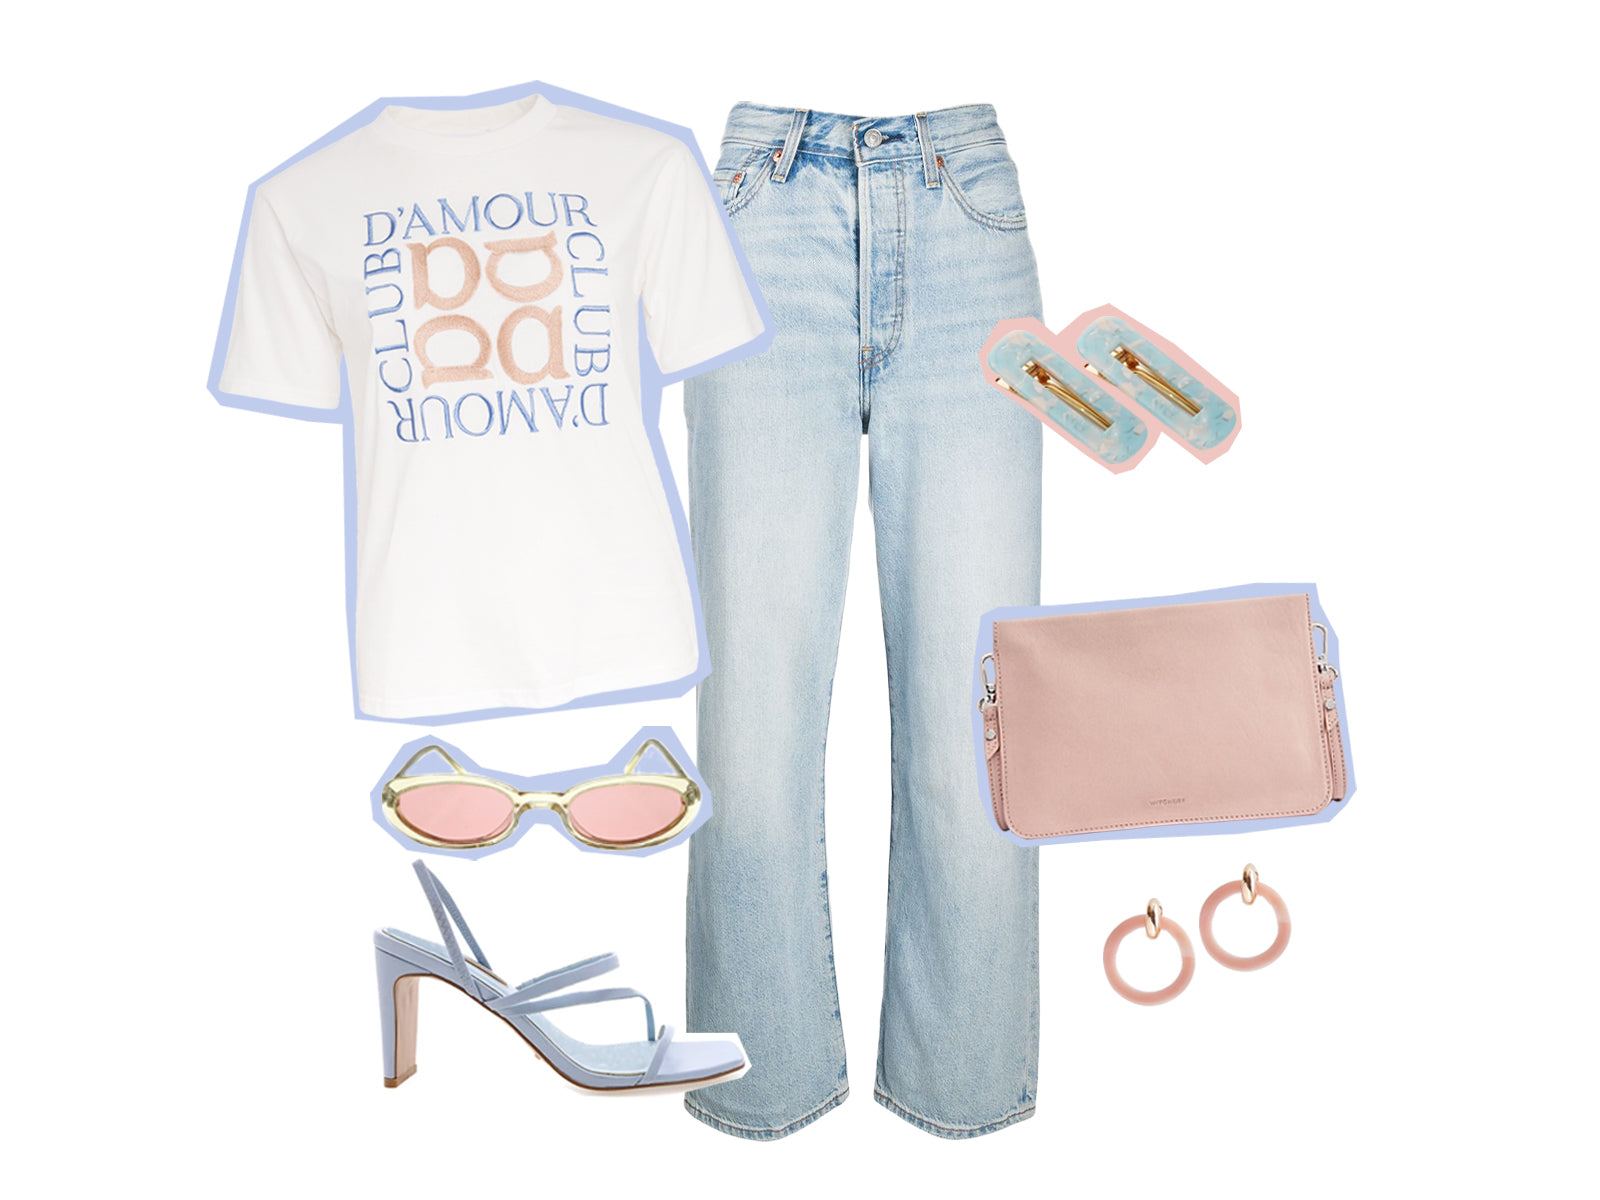 Alpha Embroidered Logo Tee, denim jeans, heels and accessories